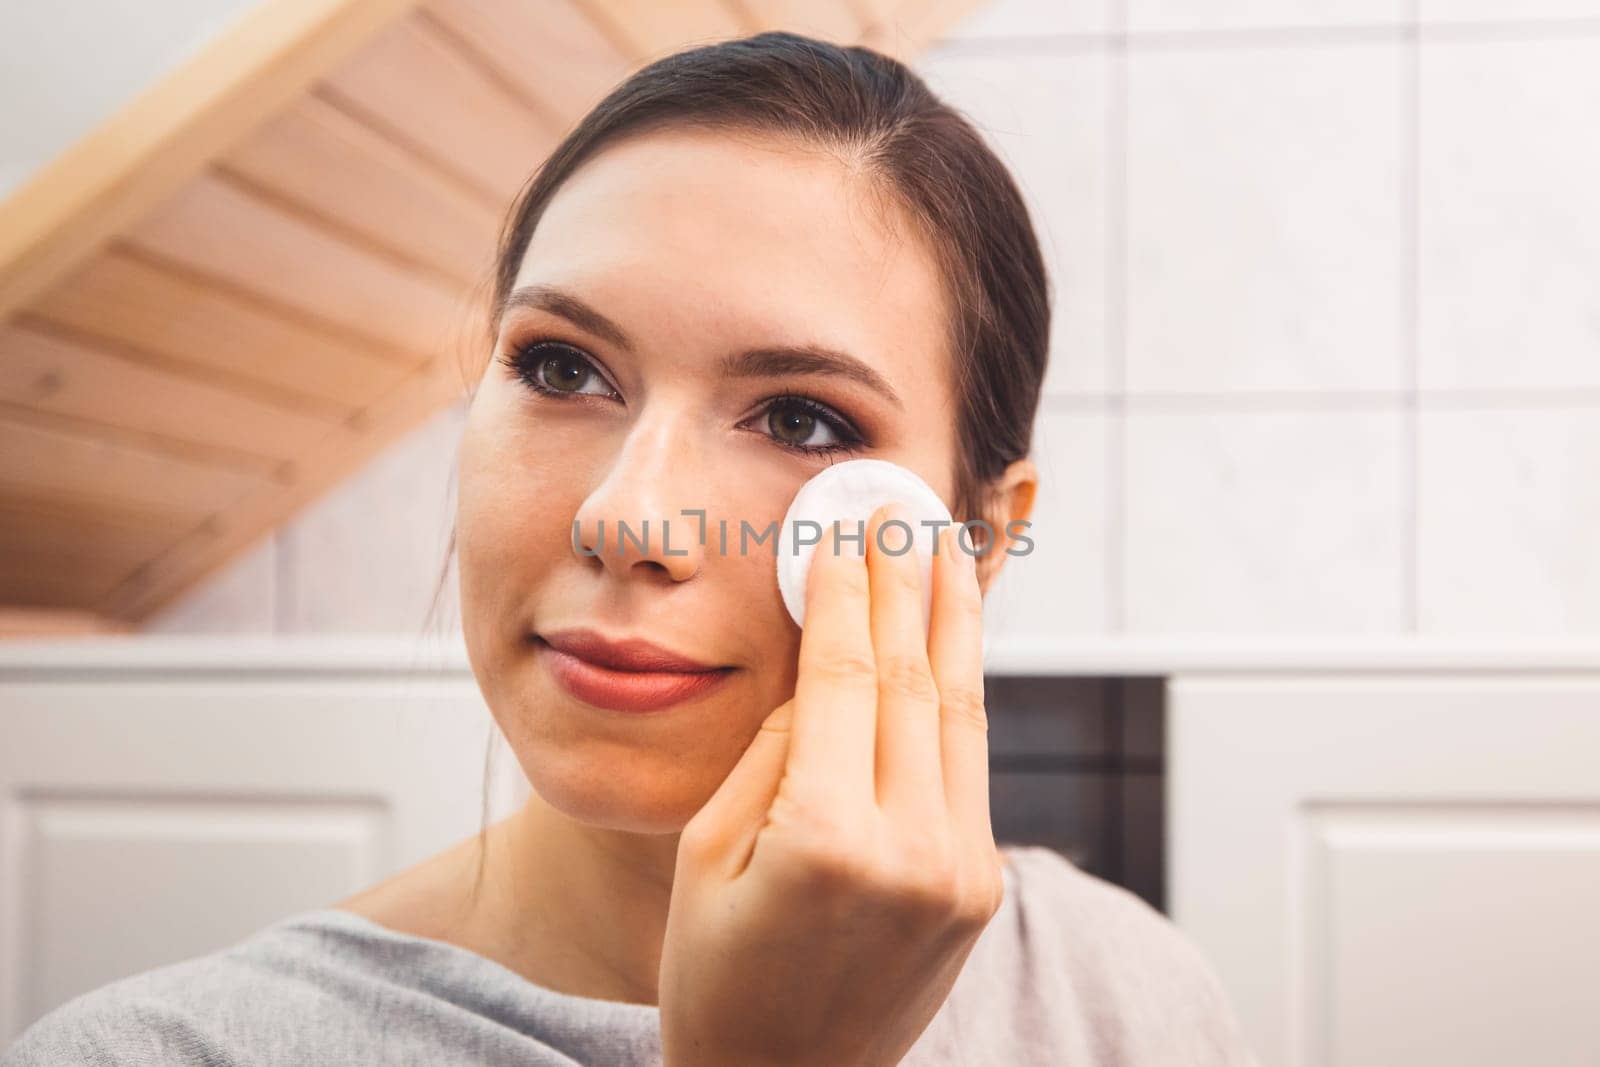 Waist up close up portrait of a young woman removing make up in her bathroom at night by VisualProductions